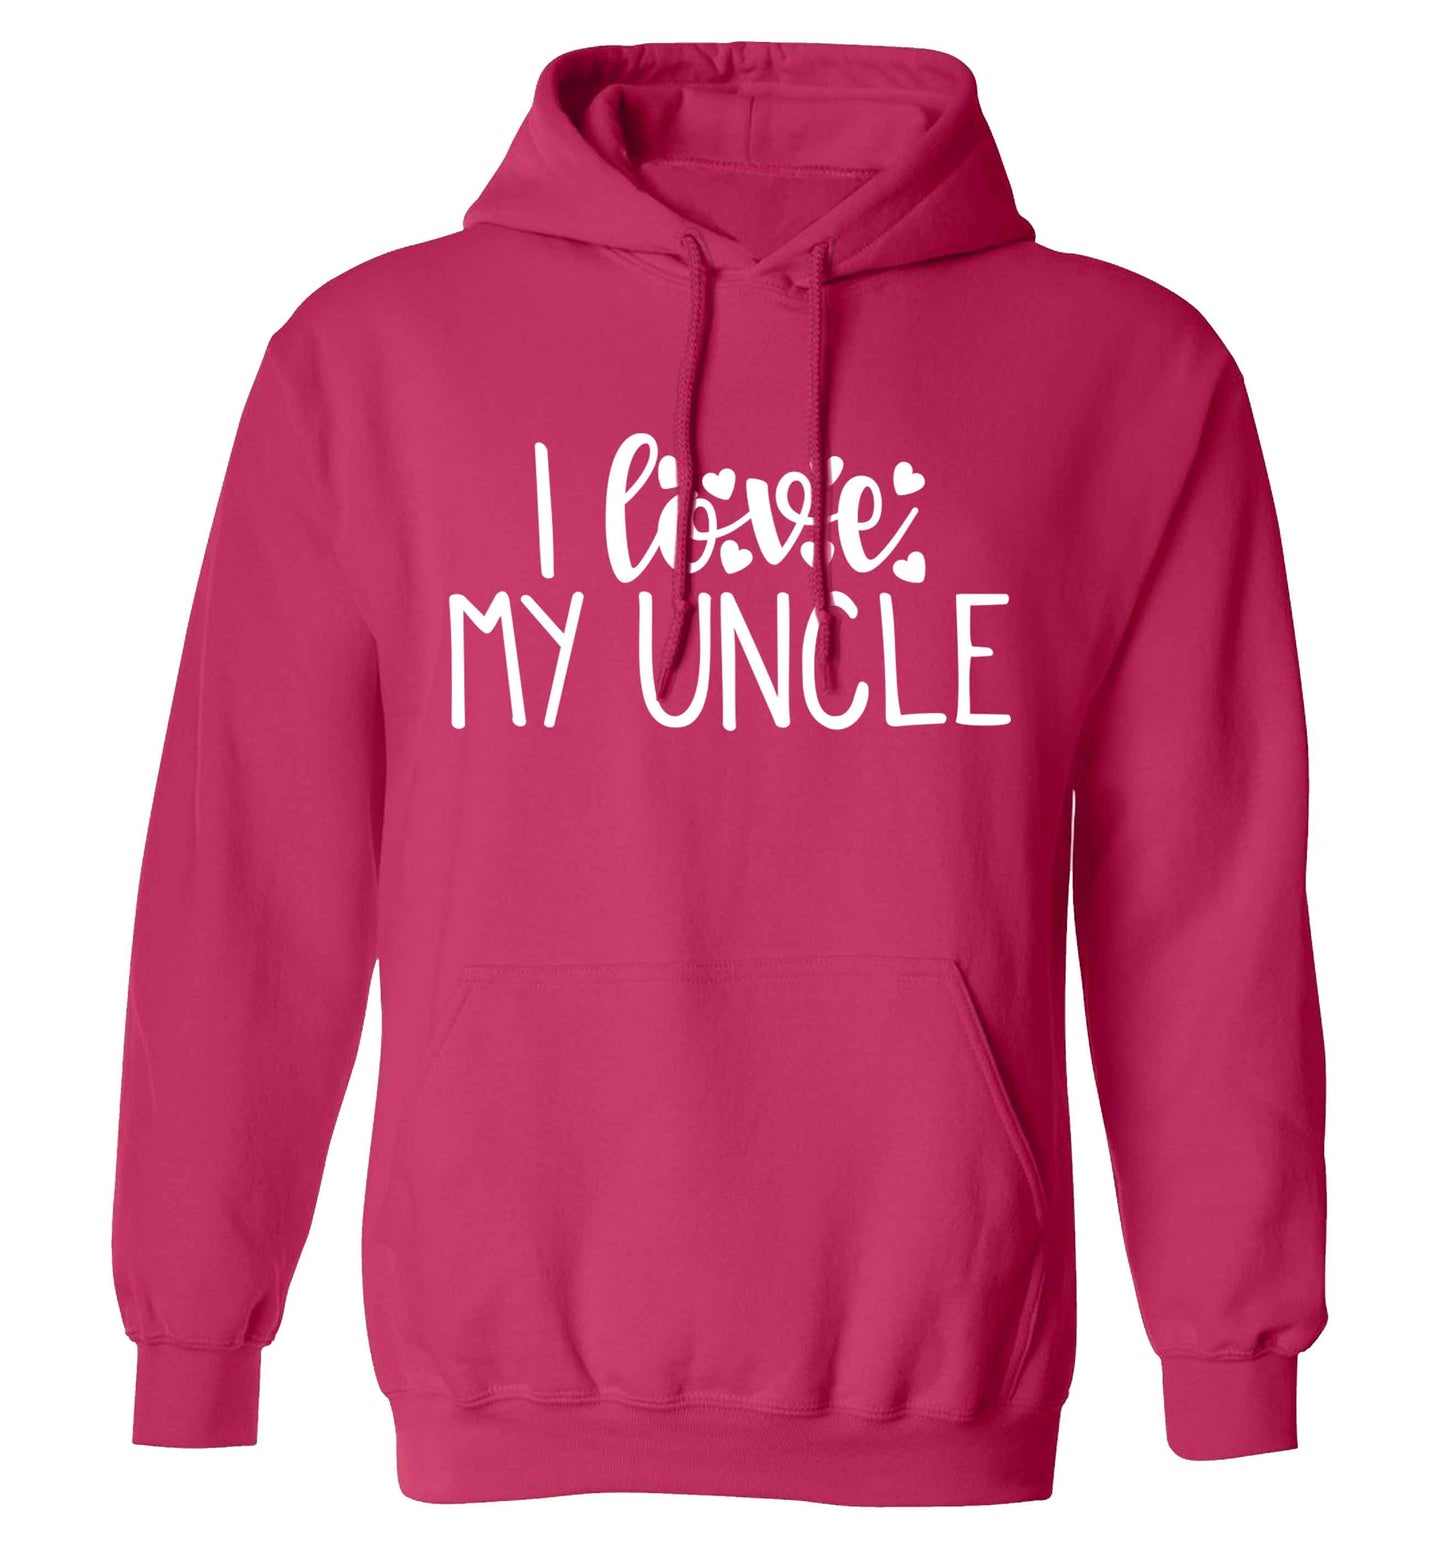 I love my uncle adults unisex pink hoodie 2XL